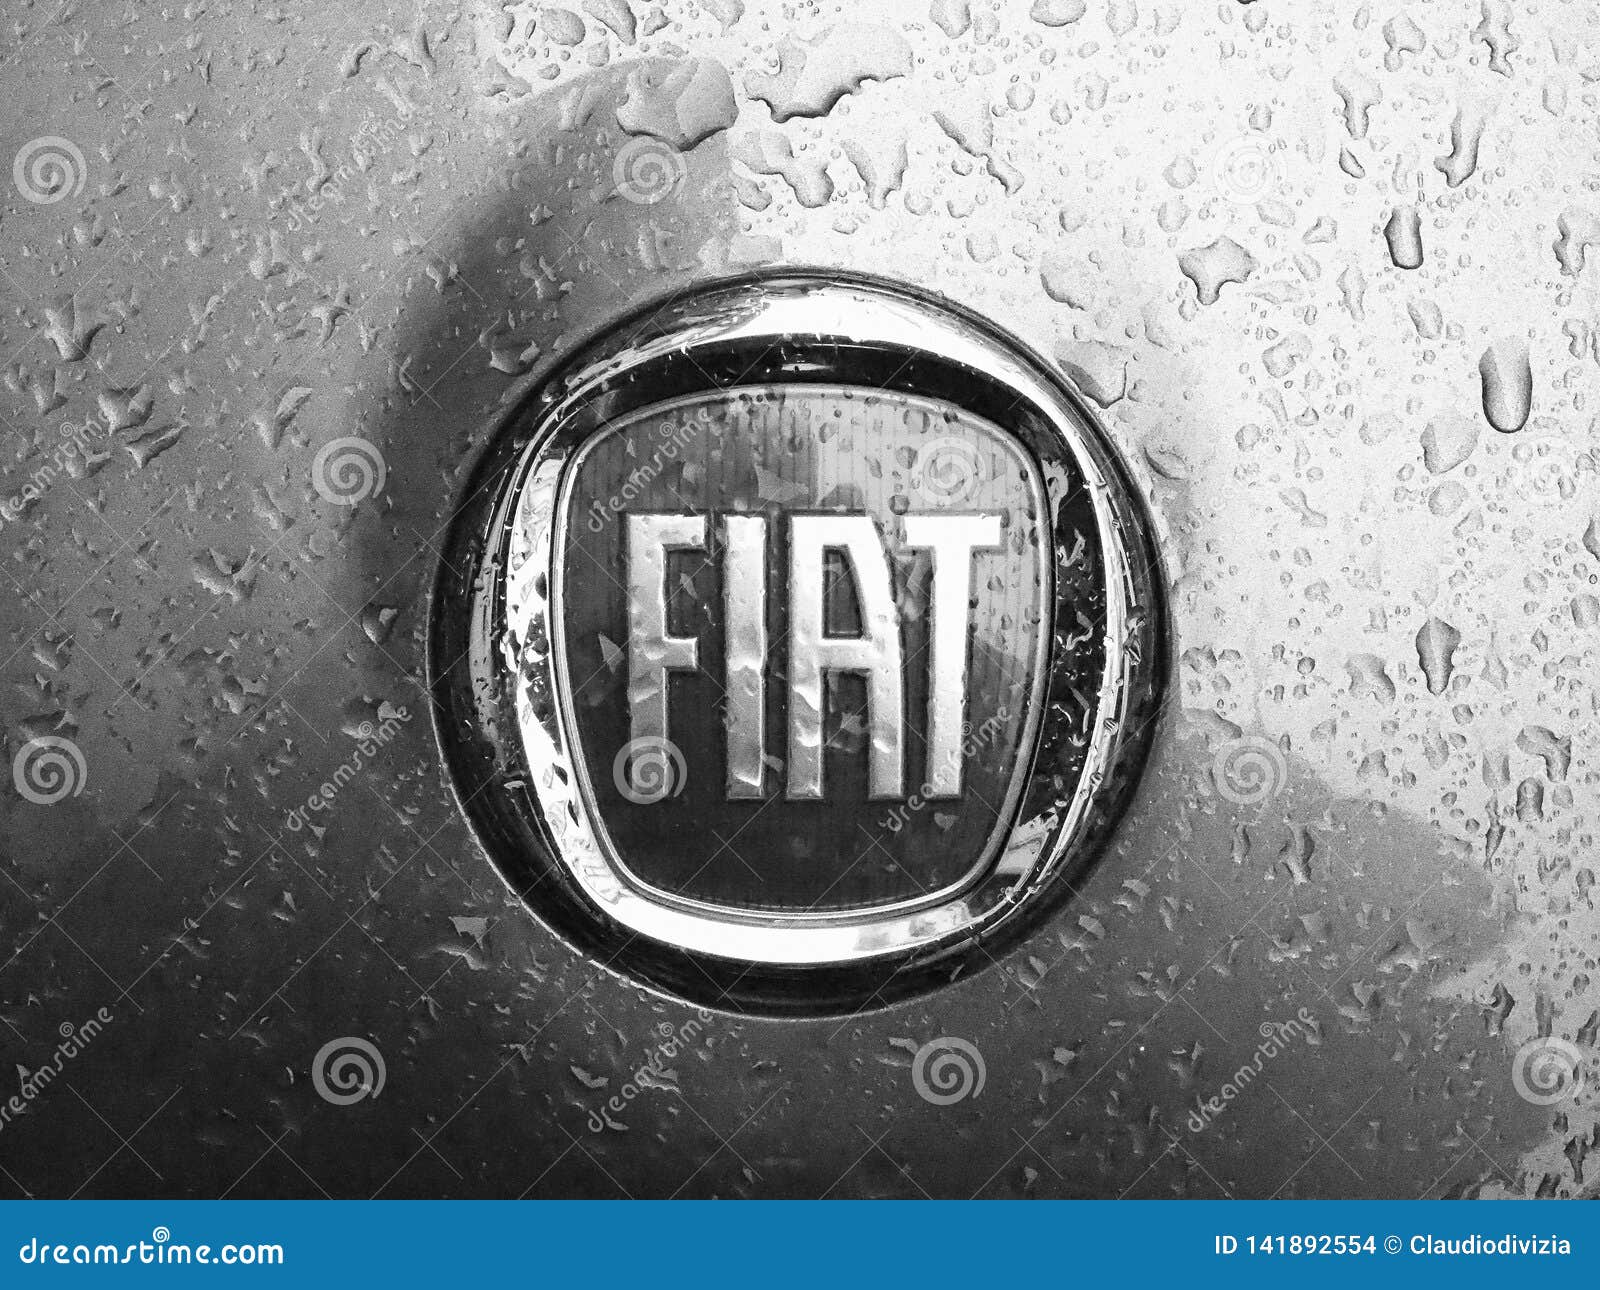 Fiat Logo on a Car in Turin in Black and White Editorial Stock Image -  Image of piemonte, europe: 141892554